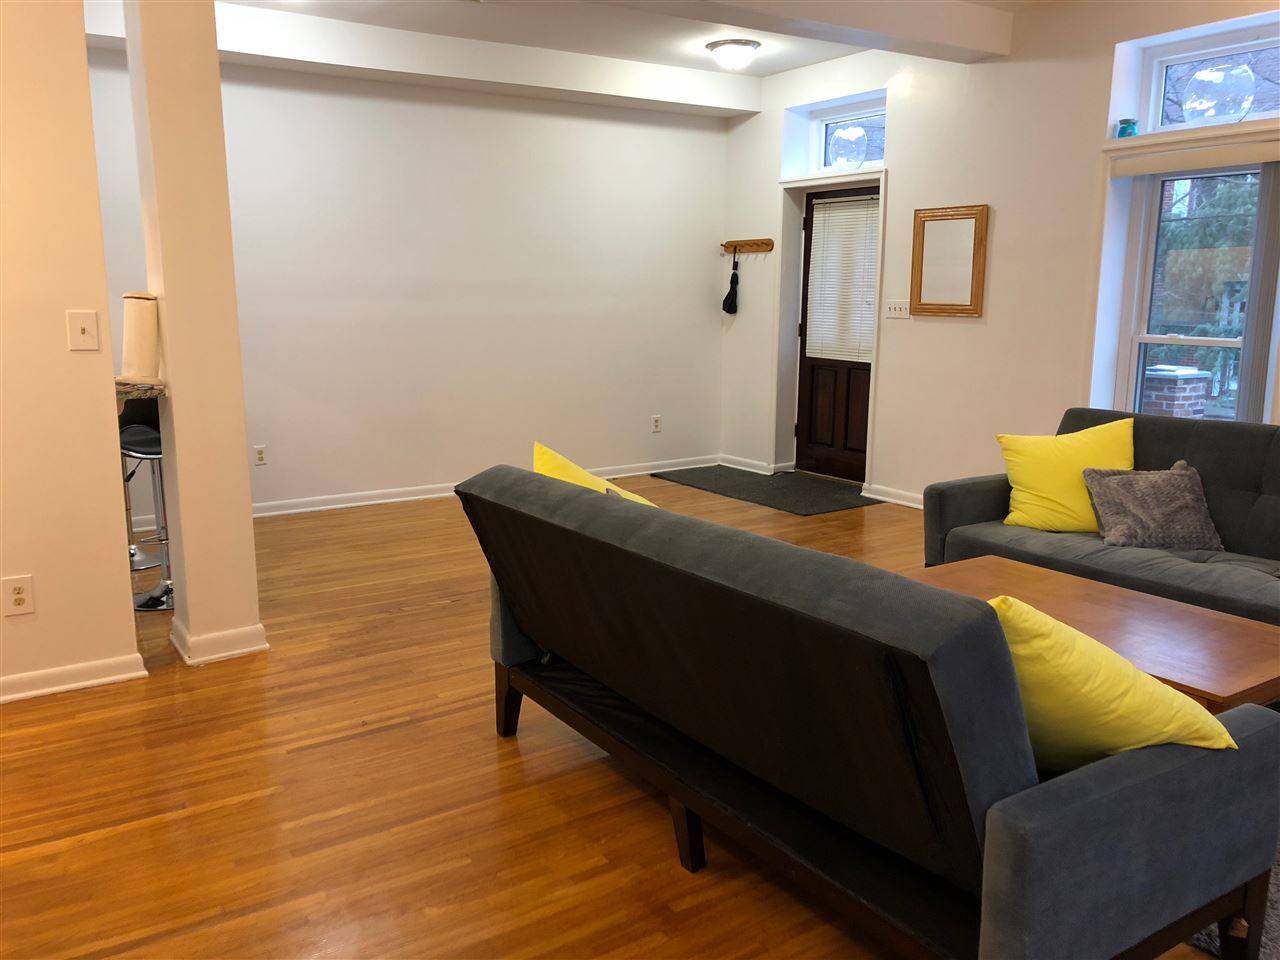 Welcome home to this spacious one bedroom (11X 15) apartment